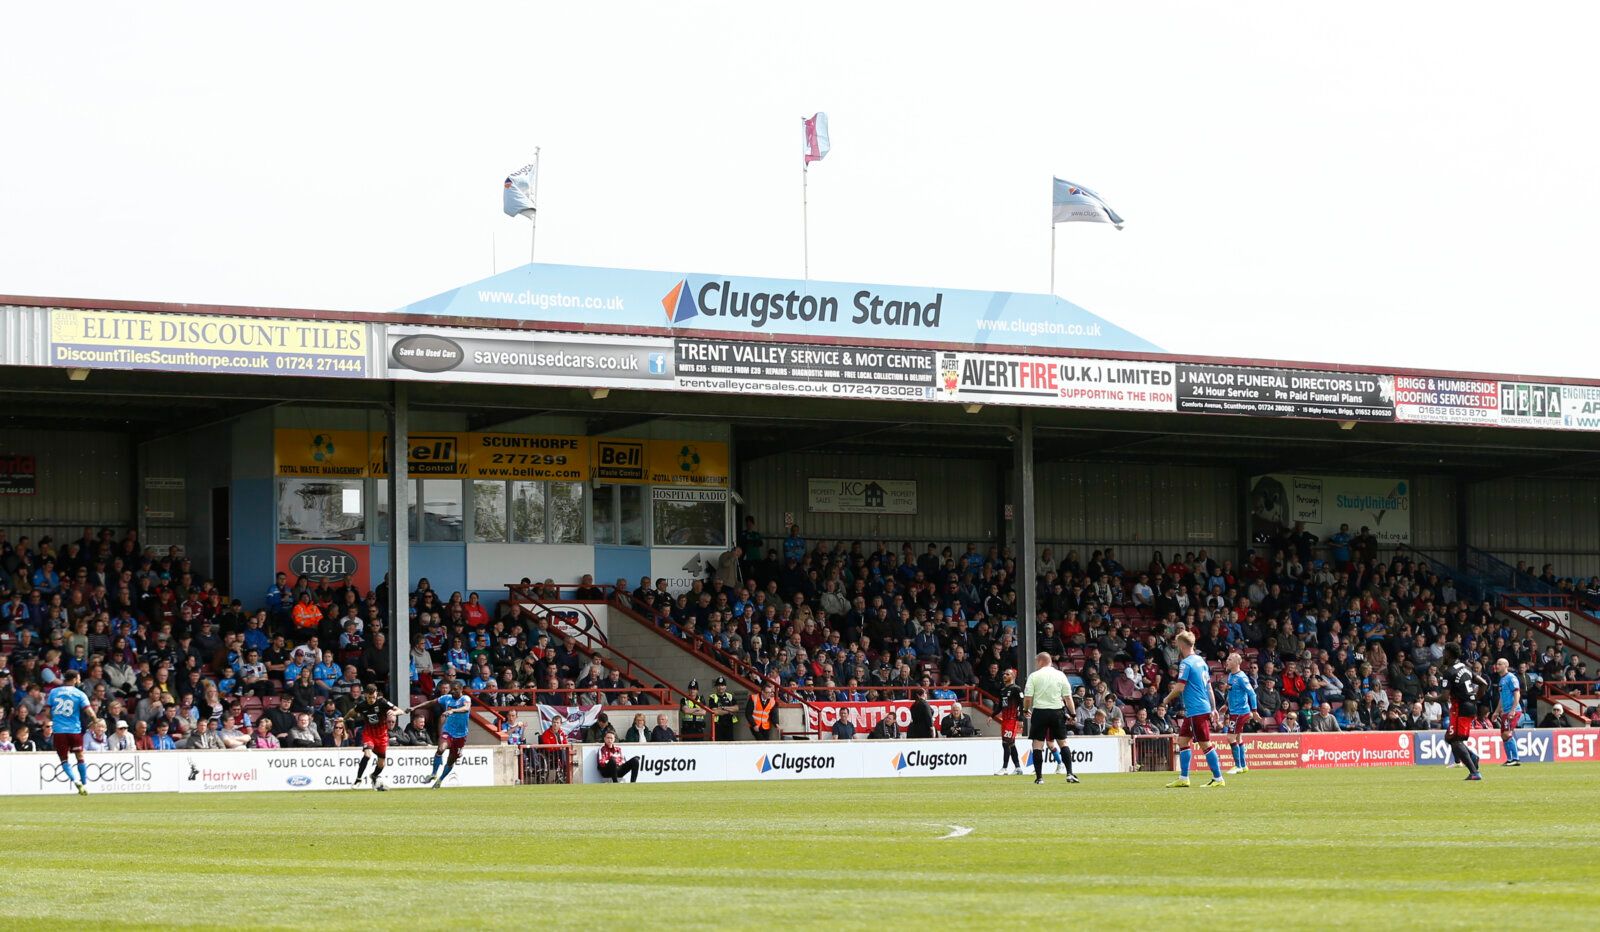 Britain Football Soccer - Scunthorpe United v Coventry City - Sky Bet League One - Glanford Park - 30/4/17 General view during the match Mandatory Credit: Action Images / Andrew Boyers Livepic EDITORIAL USE ONLY. No use with unauthorized audio, video, data, fixture lists, club/league logos or 